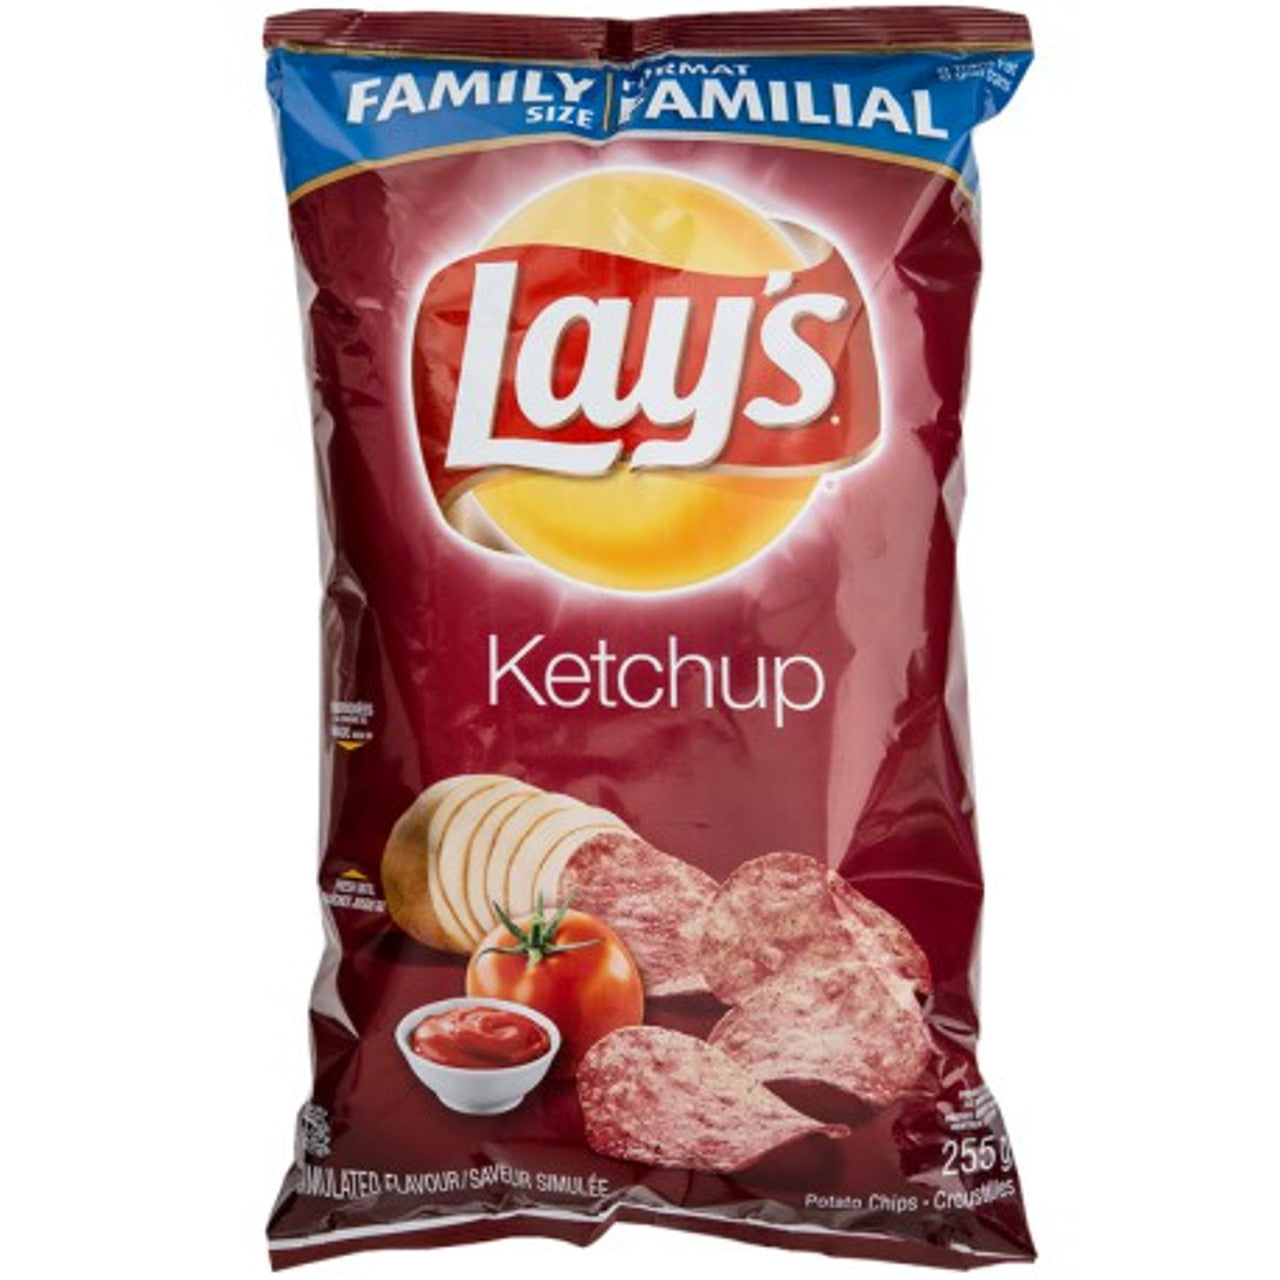 LAYS Oven Baked Potato Chips, Original (40ct x 32g/1.1oz